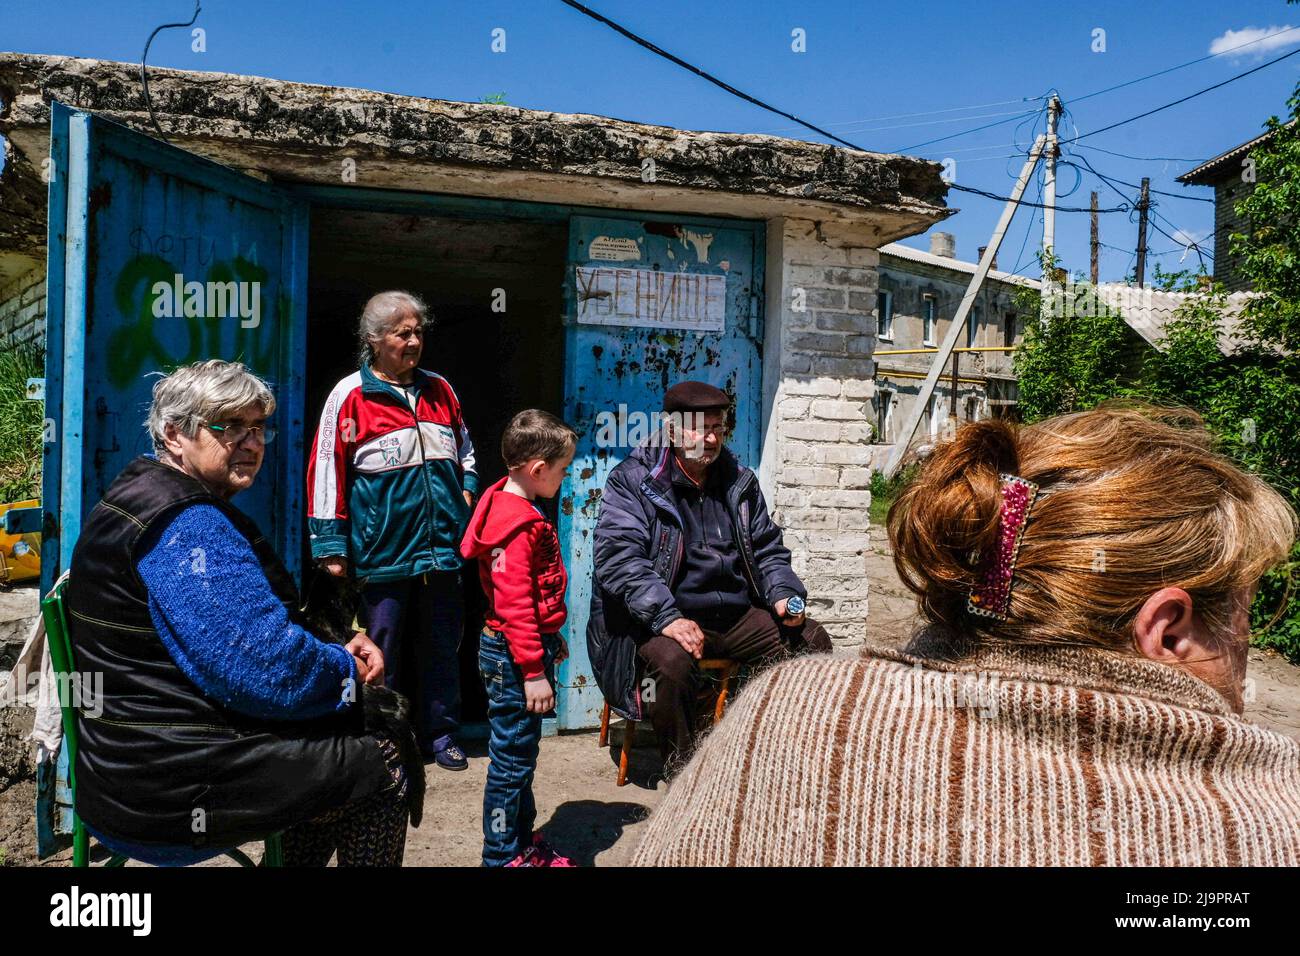 People sitting in front of a bunker where they leave in the outskirts of the city. Lysychansík, Luhansk region. 23 May 2022 Lysychansk is an elongated city on the high right bank of the Donets River in the Luhansk region. The city is part of a metropolitan area that includes Severodonetsk and Rubizhne; the three towns together constitute one of Ukraine's largest chemical complexes. The town is about 7 km from the frontline, and Russian troops are moving towards it, the city, like Severodonetsk, is almost isolated. Russian are trying to occupy the main road that connect Lysychansk to Kramatorsk Stock Photo